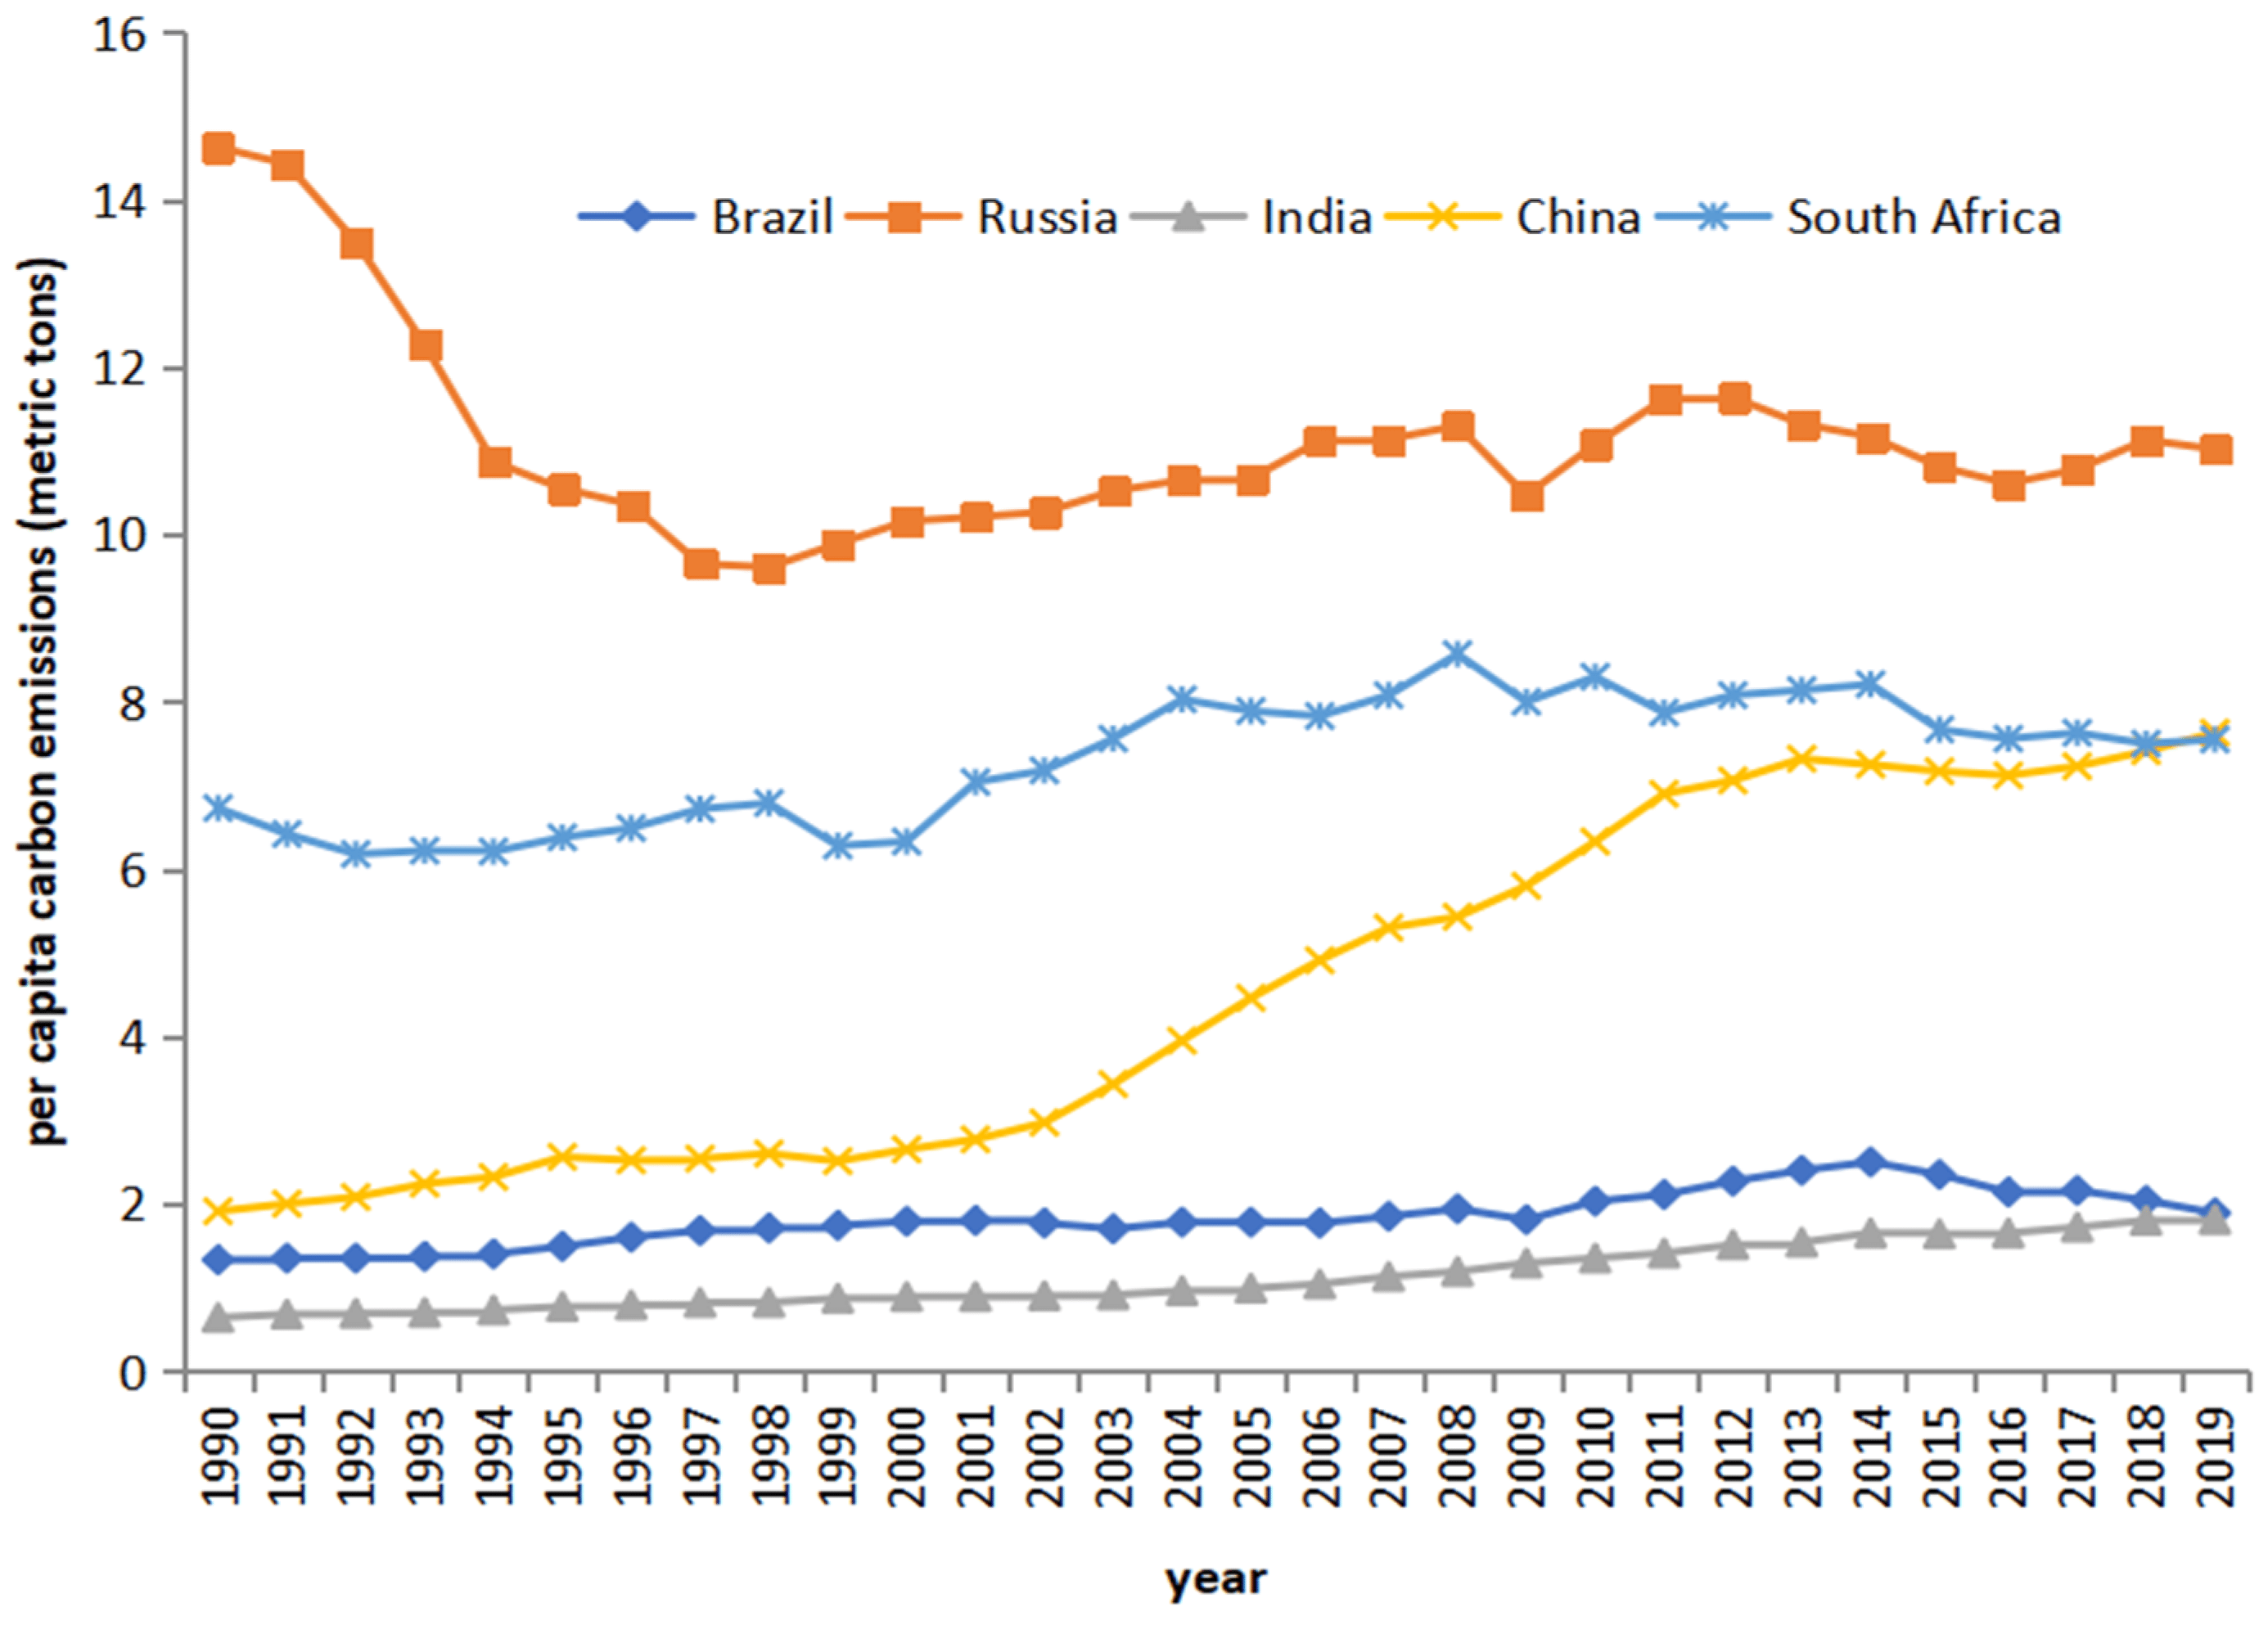 BRICS nations are major contributors to global emissions.